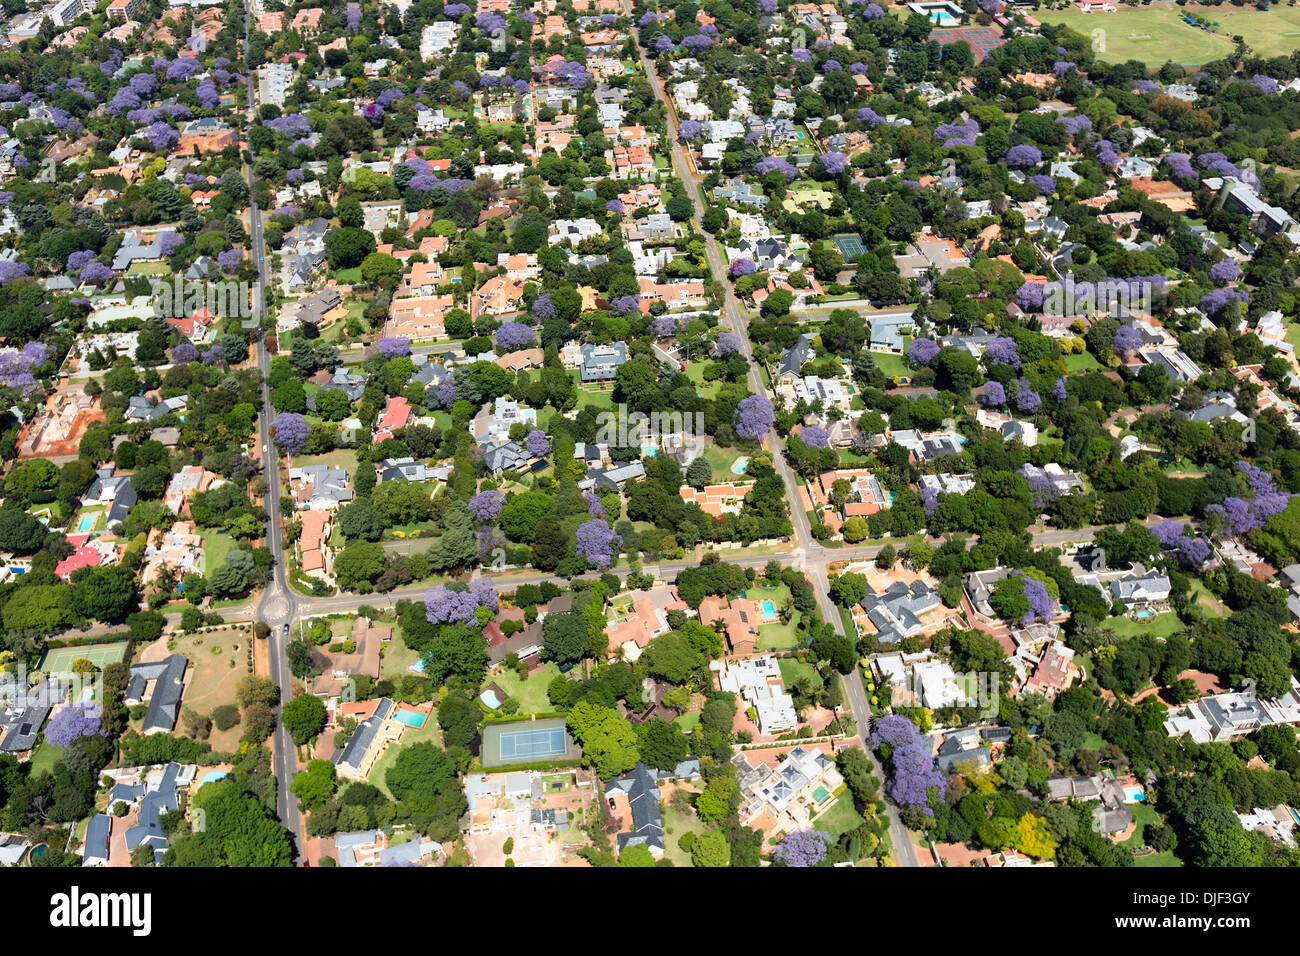 Aerial view of Jacaranda trees in blossom,Johannesburg suburbs, making it one of the greenest cities in the world.South Africa Stock Photo